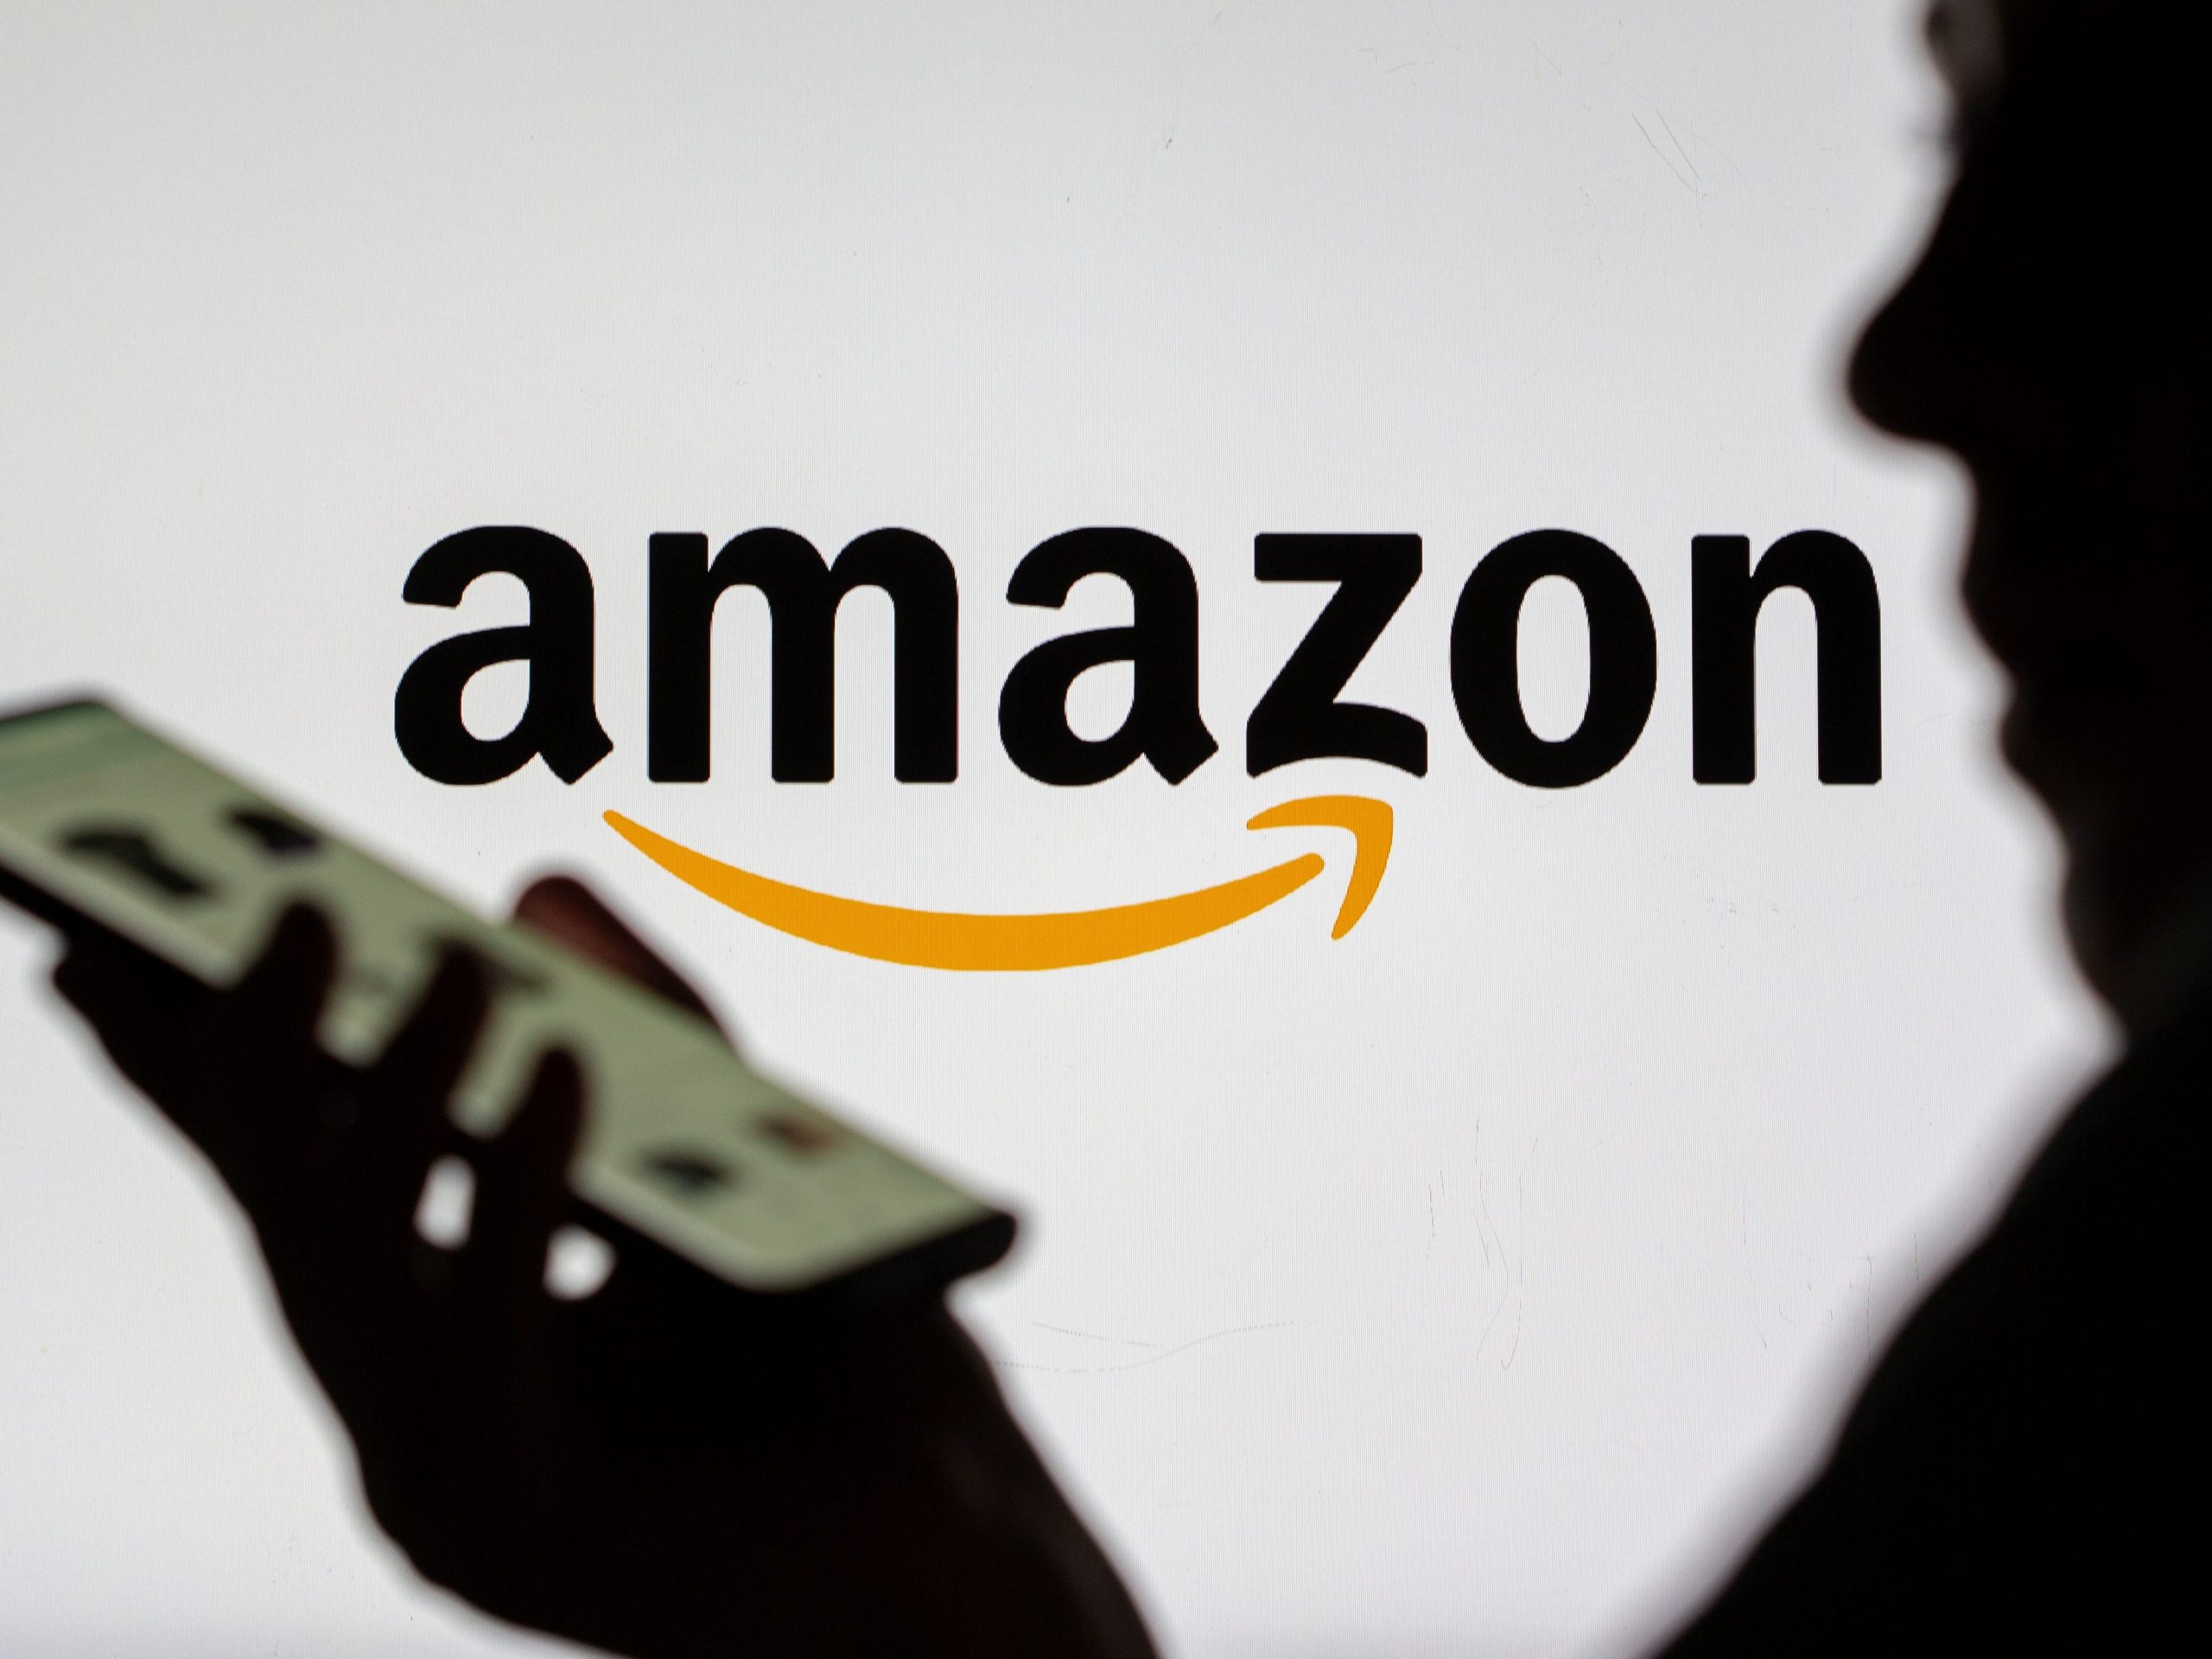 Silhouette of a person holding a phone, with the Amazon logo in the background